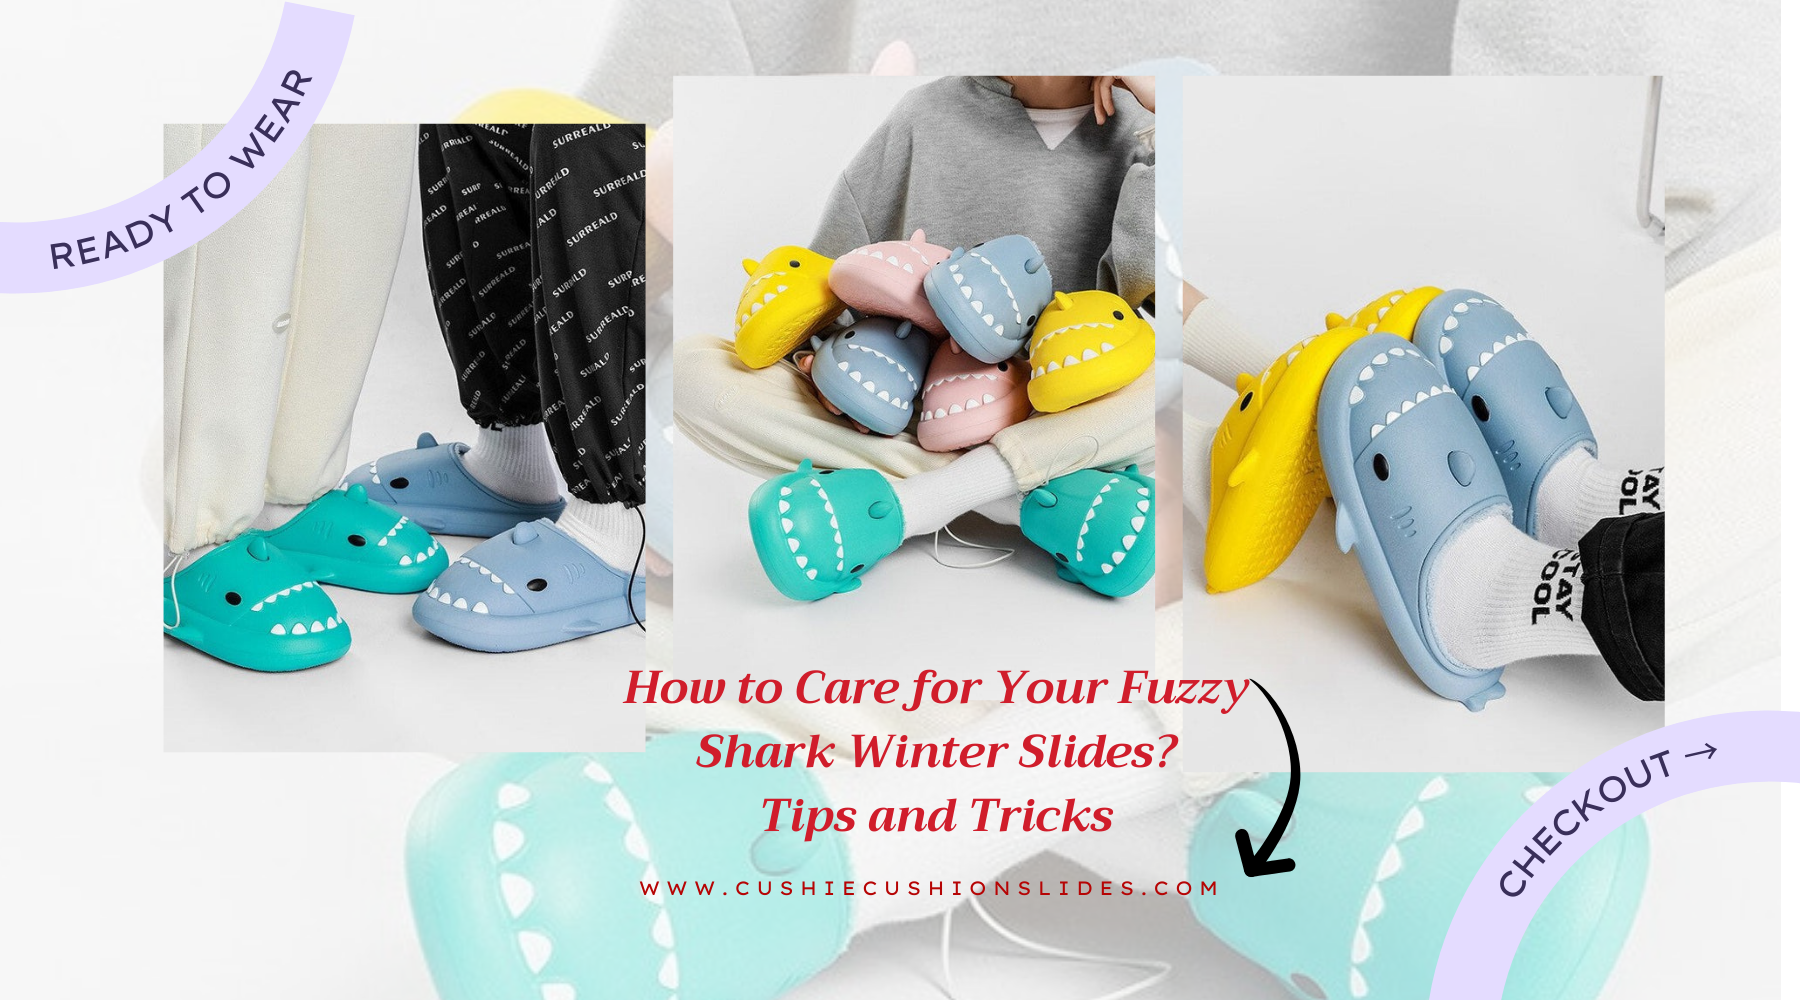 How to Care for Your Fuzzy Shark Winter Slides: Tips and Tricks